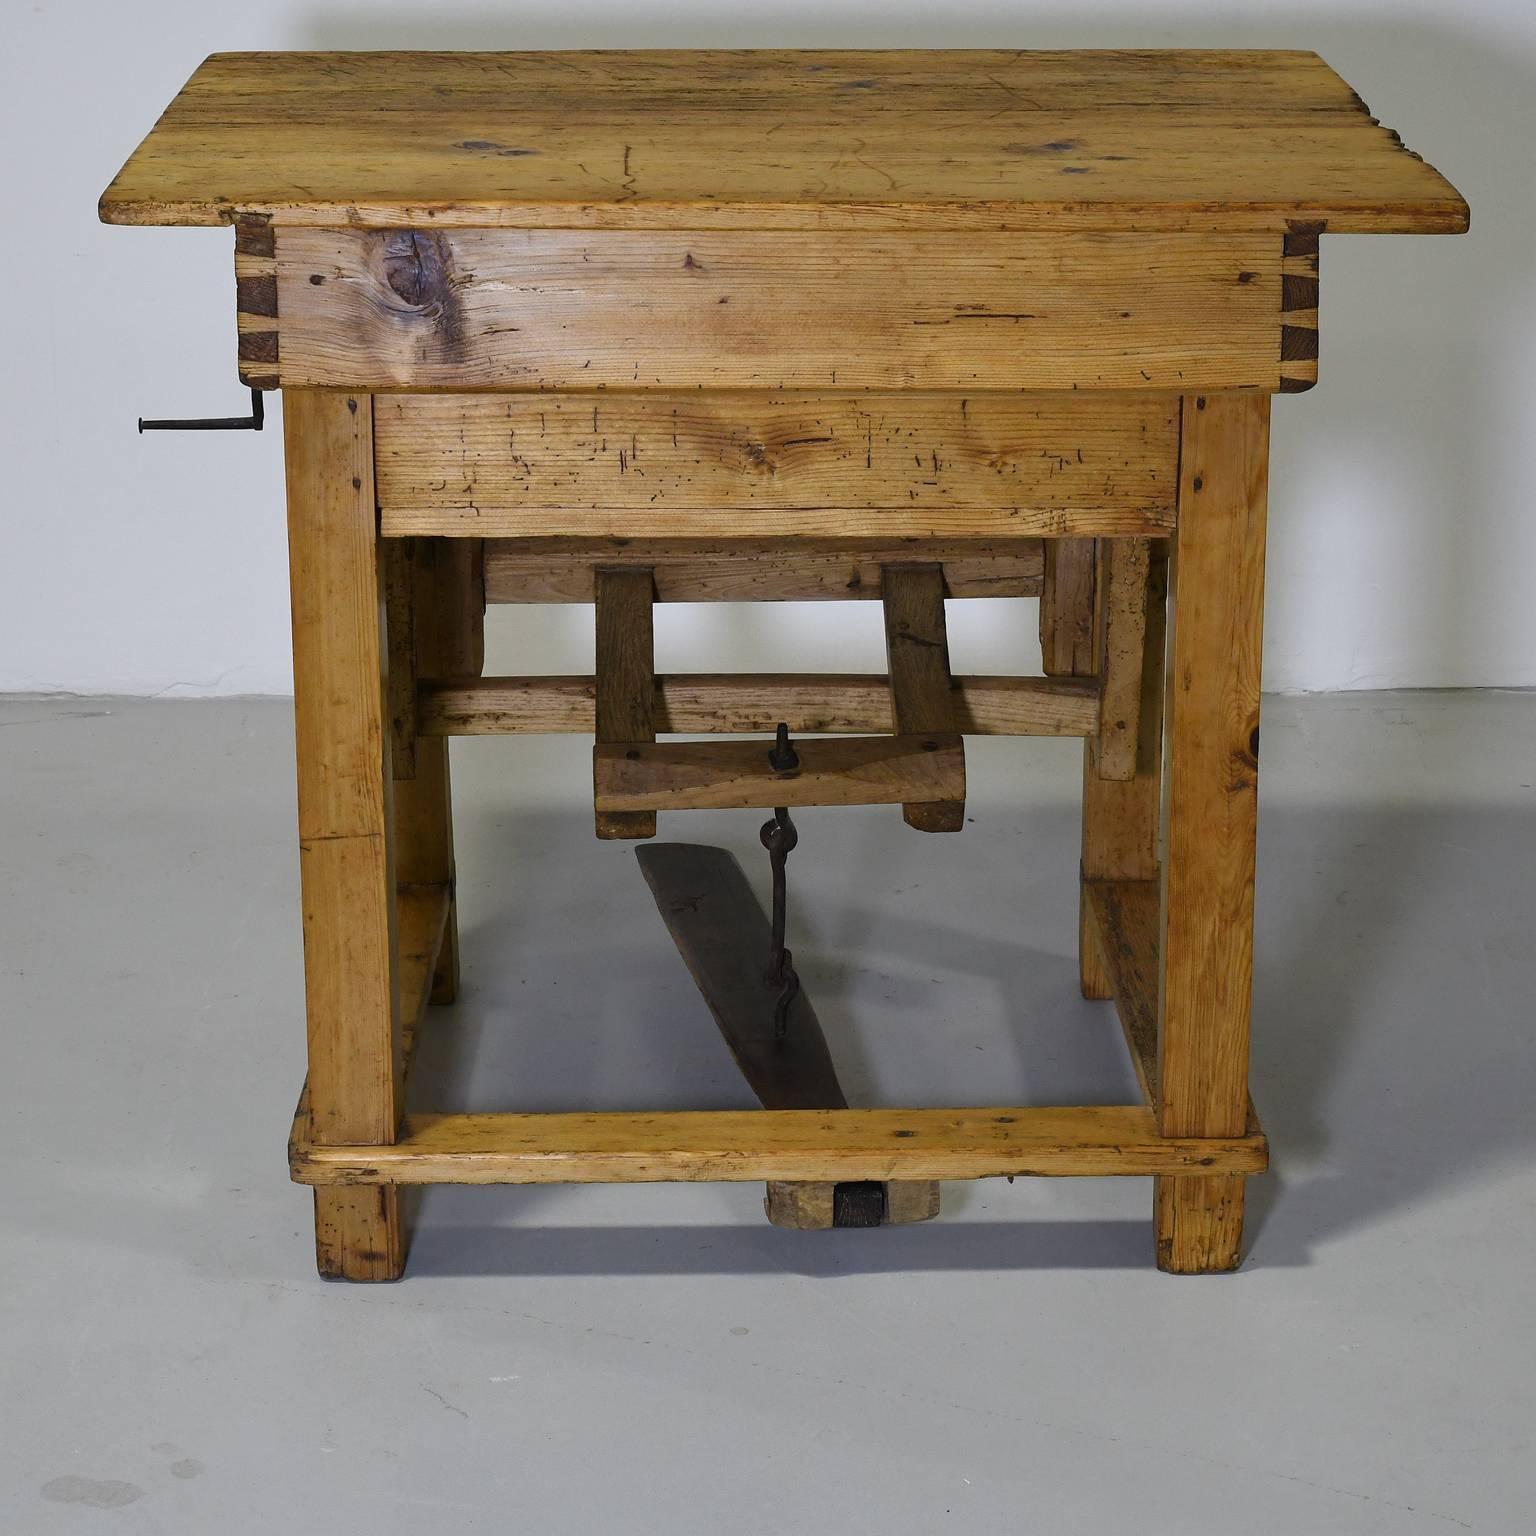 A rare piece consisting of a pine table doubling as a mangle, with the rollers and foot press housed in the interior, iron handle on the side, and the top opening on a slant to provide a surface from which to feed or draw out the fabric. Pegged